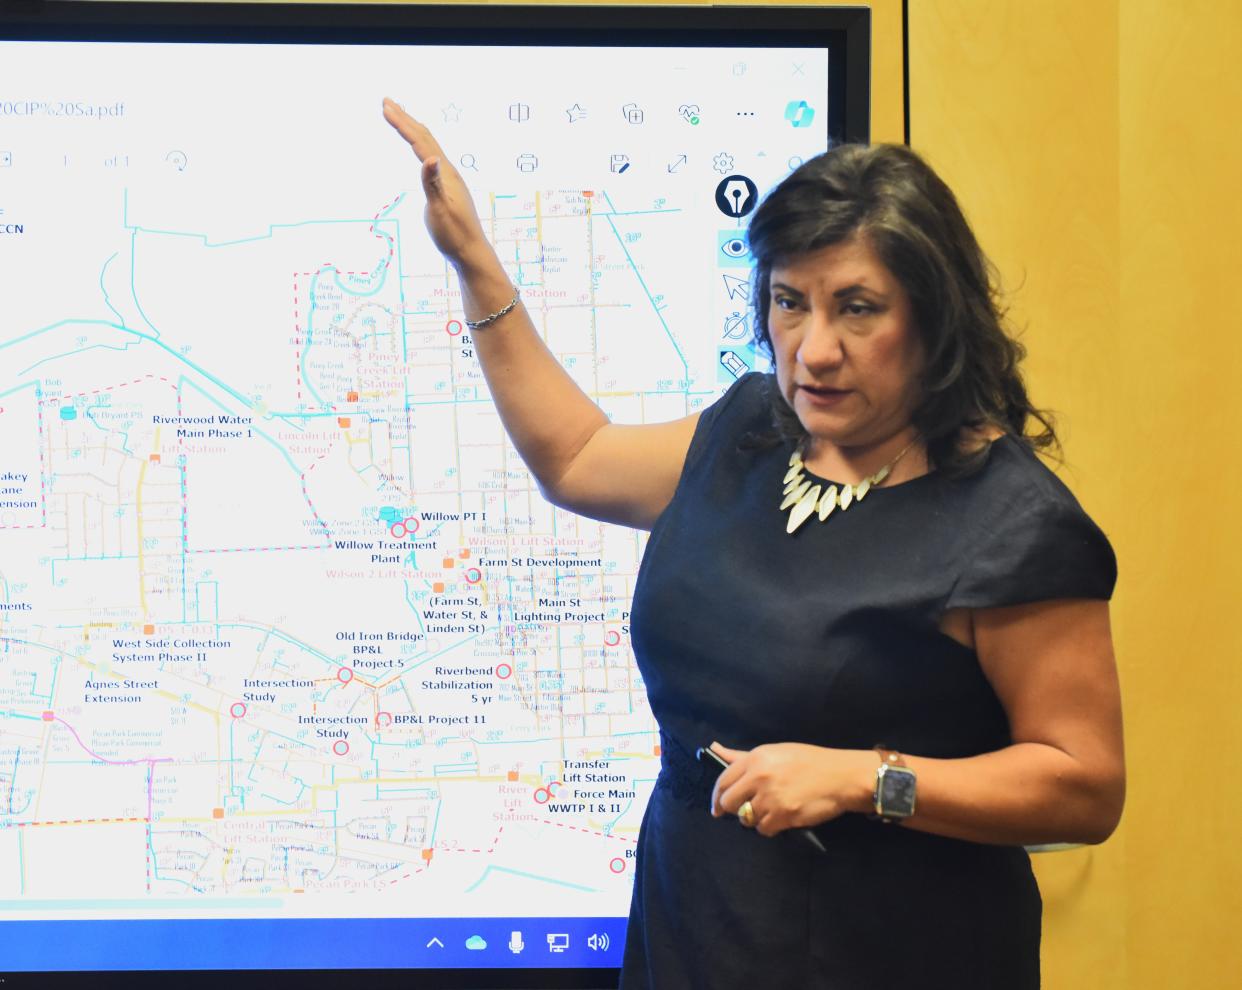 Bastrop City Manager Sylvia Carrillo speaks Jan. 18 at City Hall during the "Sit with Sylvia" public-input session. The next chat is set for Thursday, Feb. 22, at 7:30 a.m. at the Bastrop Convention Center.